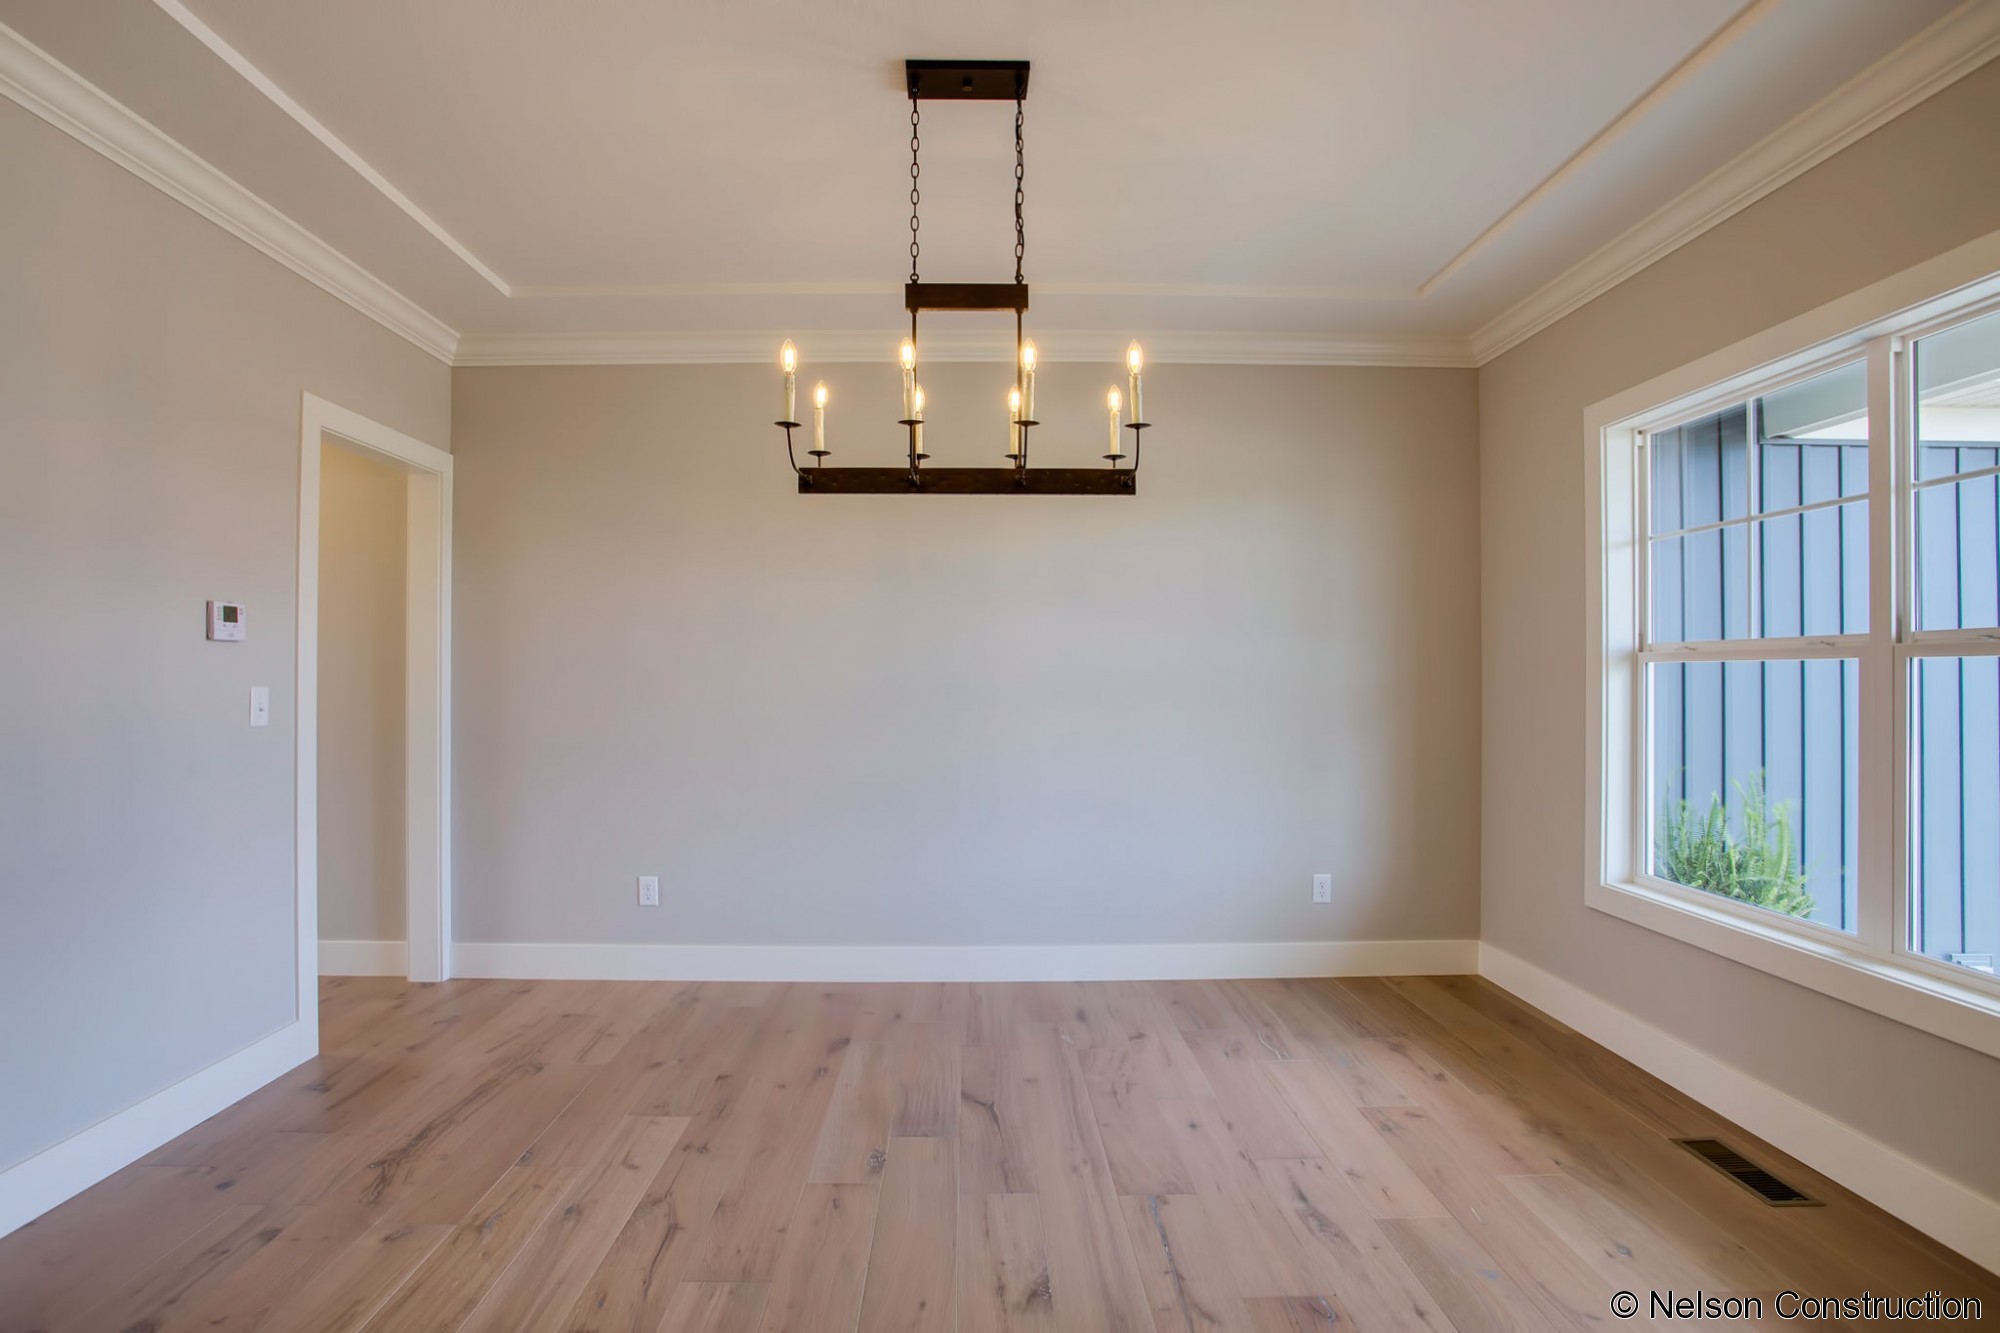 The dining room of this new Cherrydale plan features wire brushed wide plank flooring and opens to the foyer, bringing light into the space.